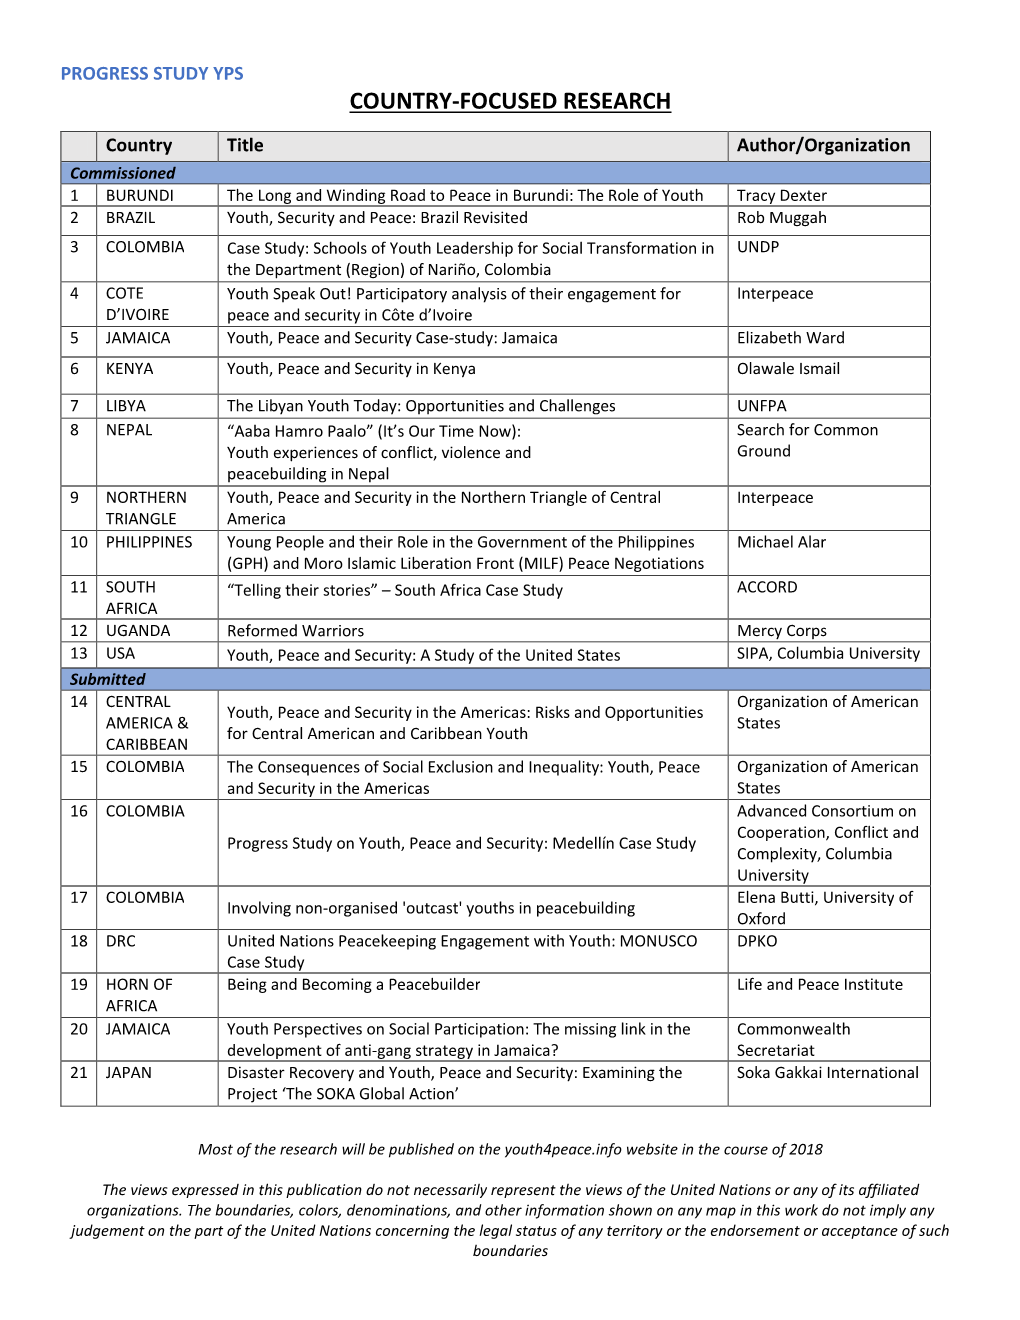 List of Research Commissioned and Submitted